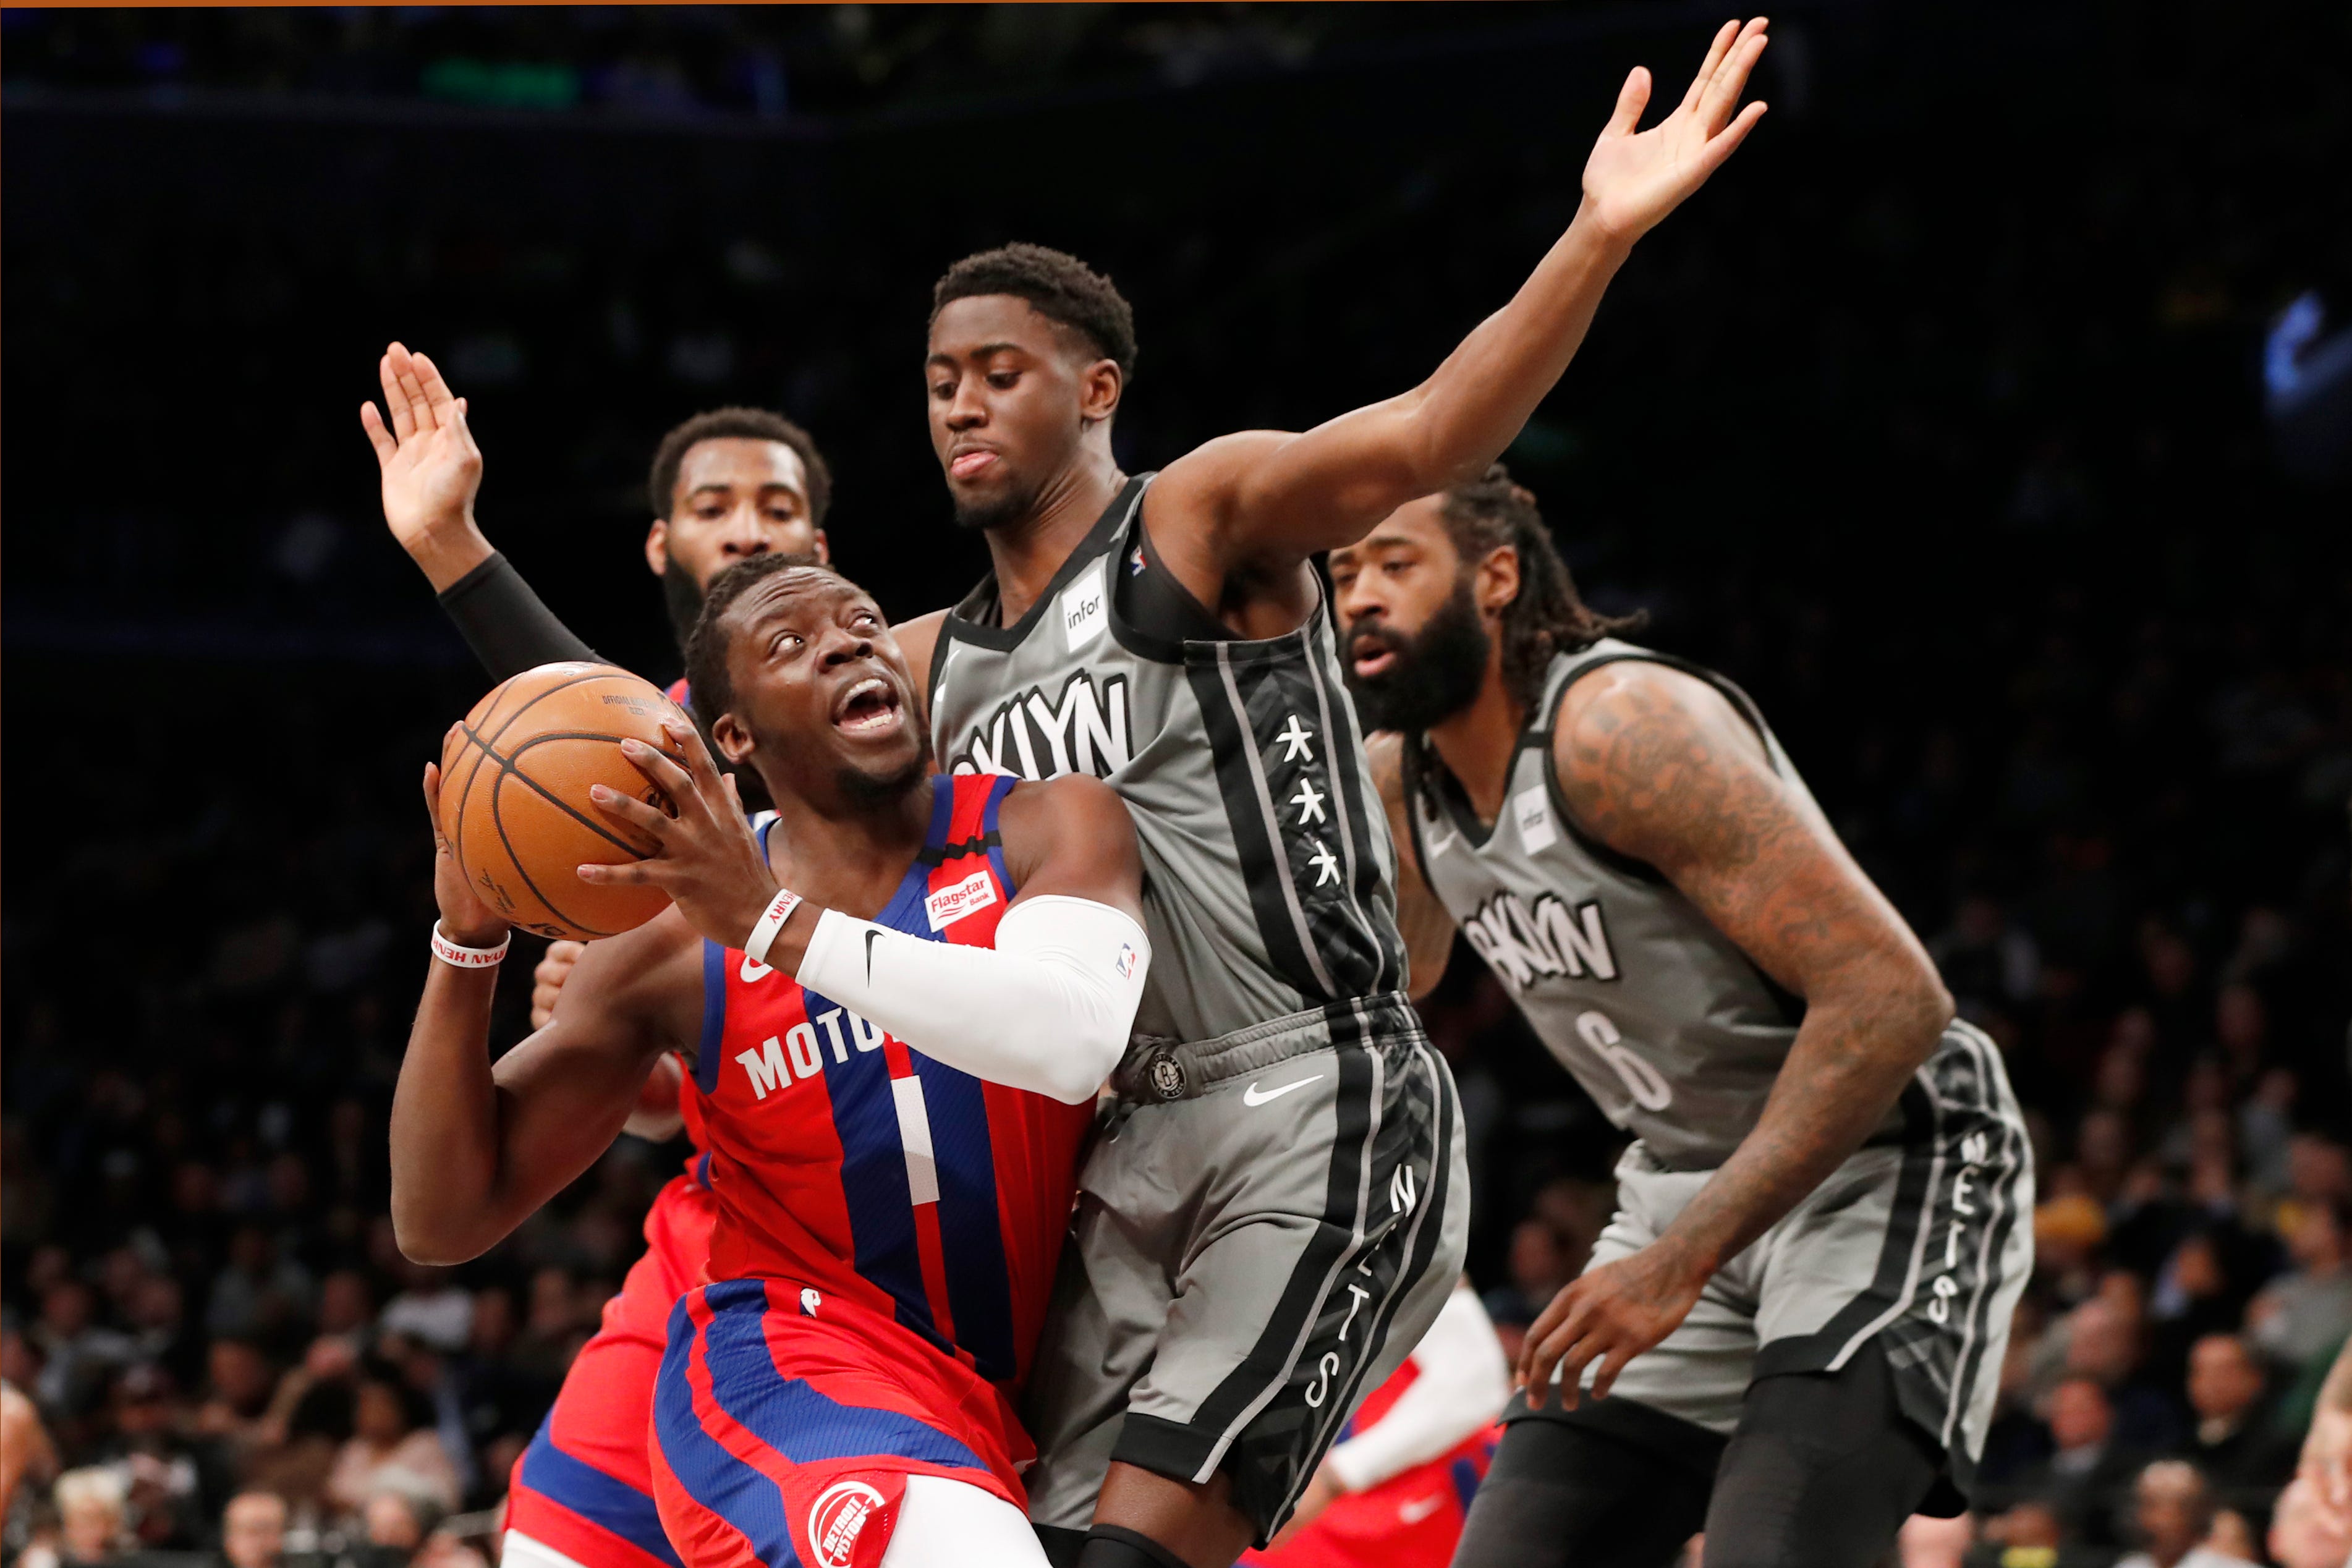 Detroit Pistons guard Reggie Jackson drives up against Brooklyn Nets guard Caris LeVert  as Nets center DeAndre Jordan watches during the first half in New York on Wednesday, Jan. 29, 2020.